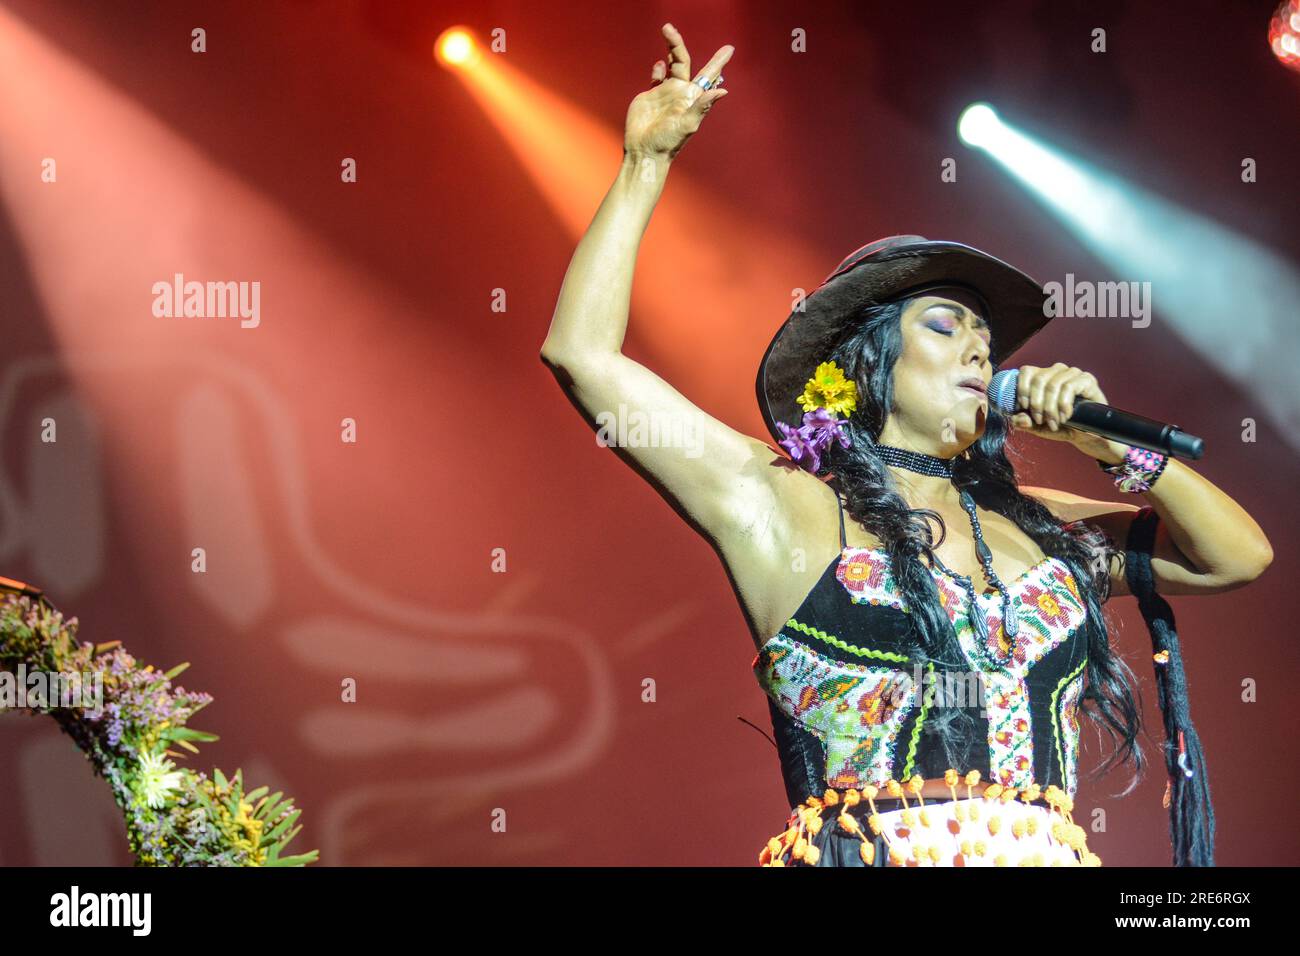 Mexican singer Lila Downs performing live Stock Photo